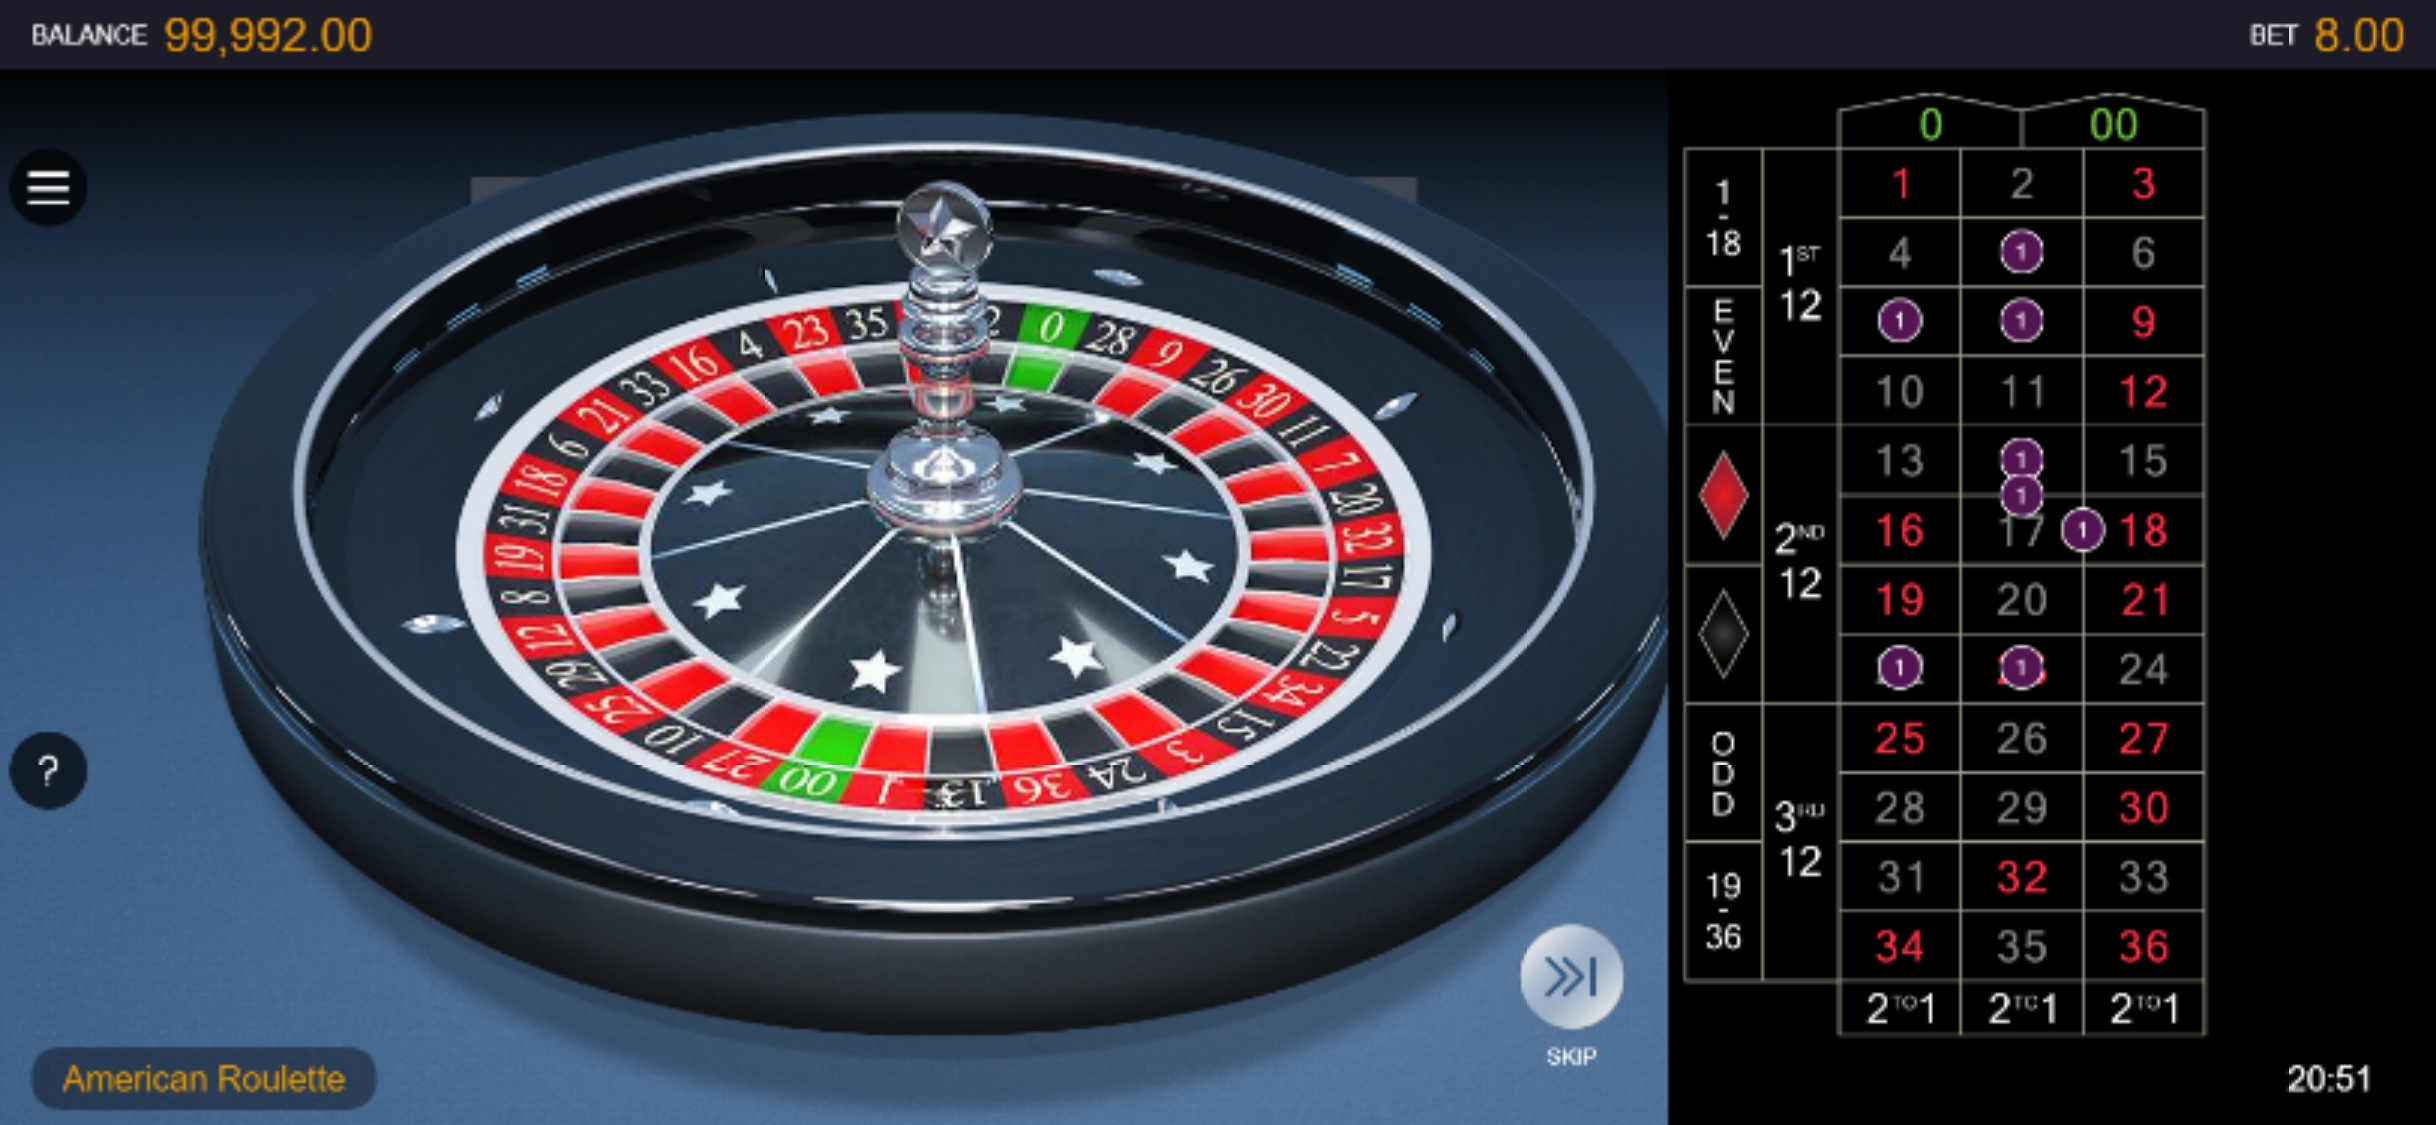 Norske Automater Casino Mobile Casino Games Review